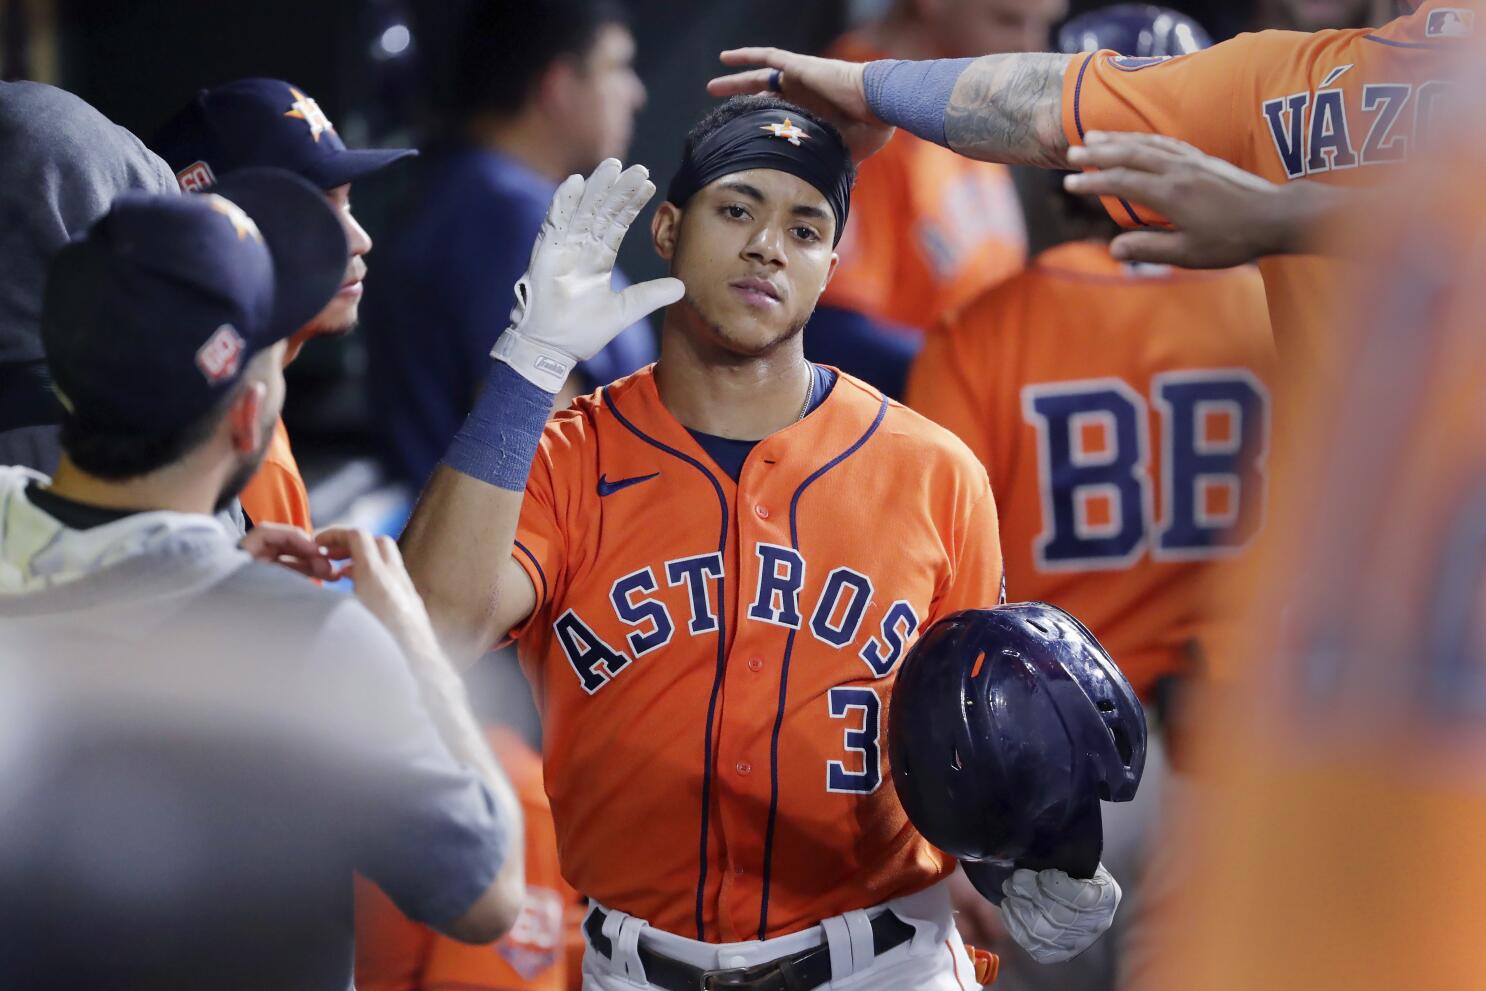 Peña, McCormick homer to lead Astros over Angels 4-3